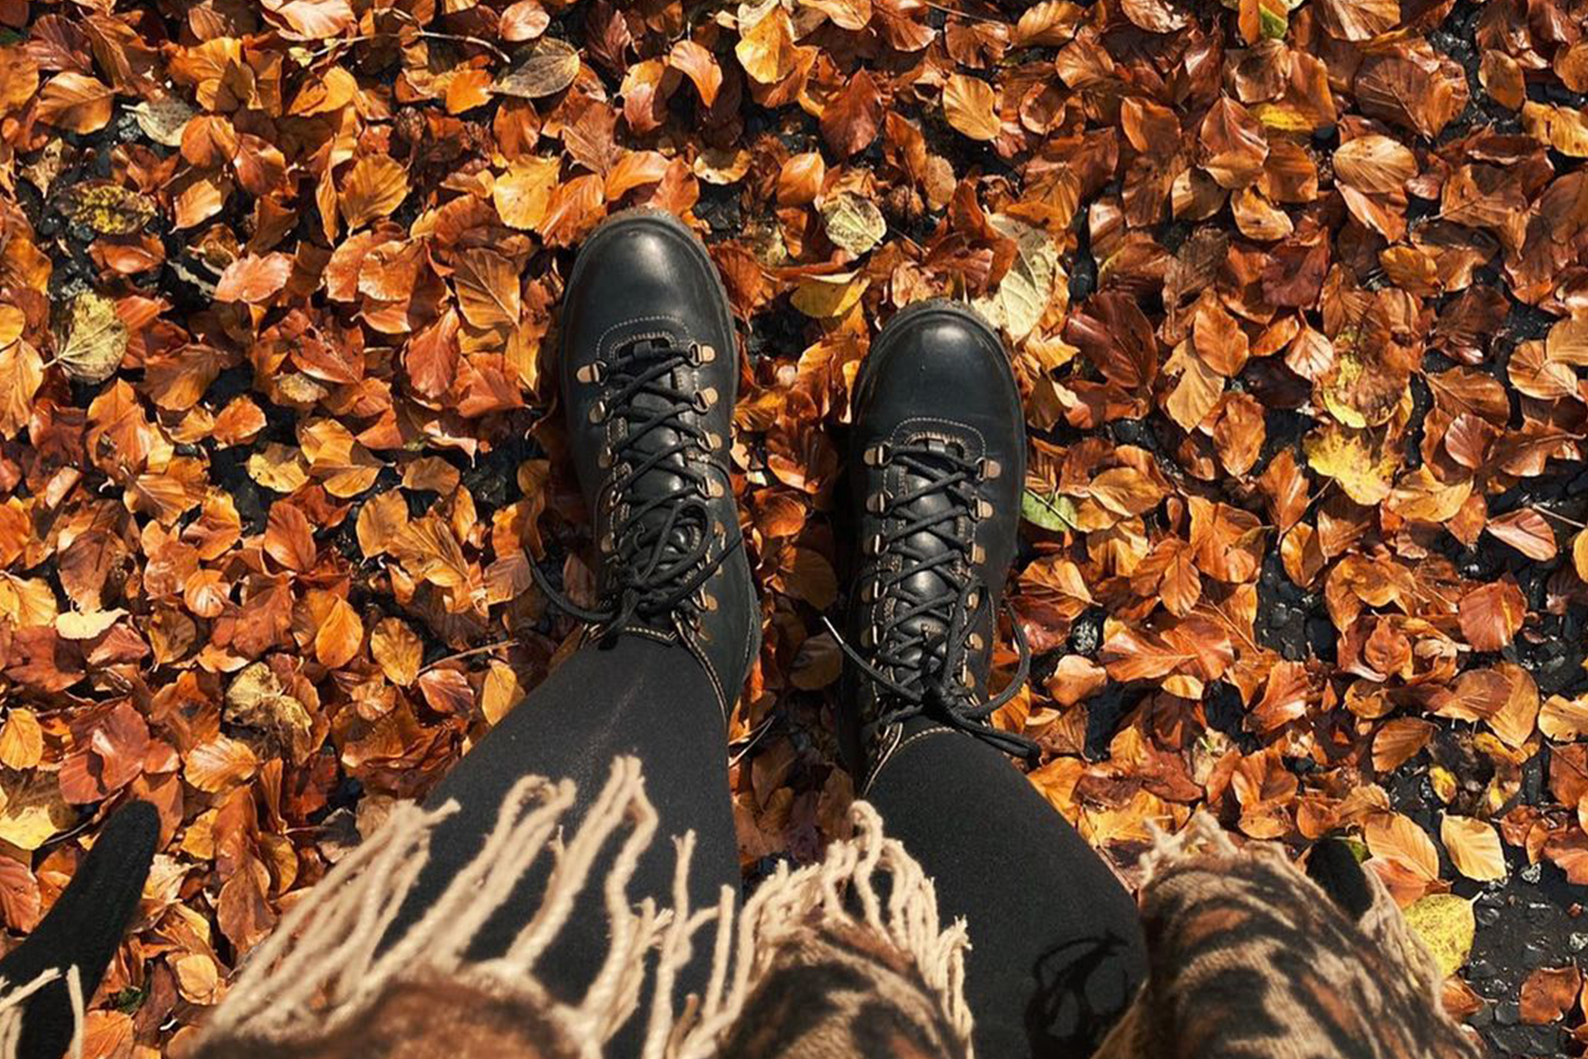 Nicola's lanx boots surrounded by autumn leaves